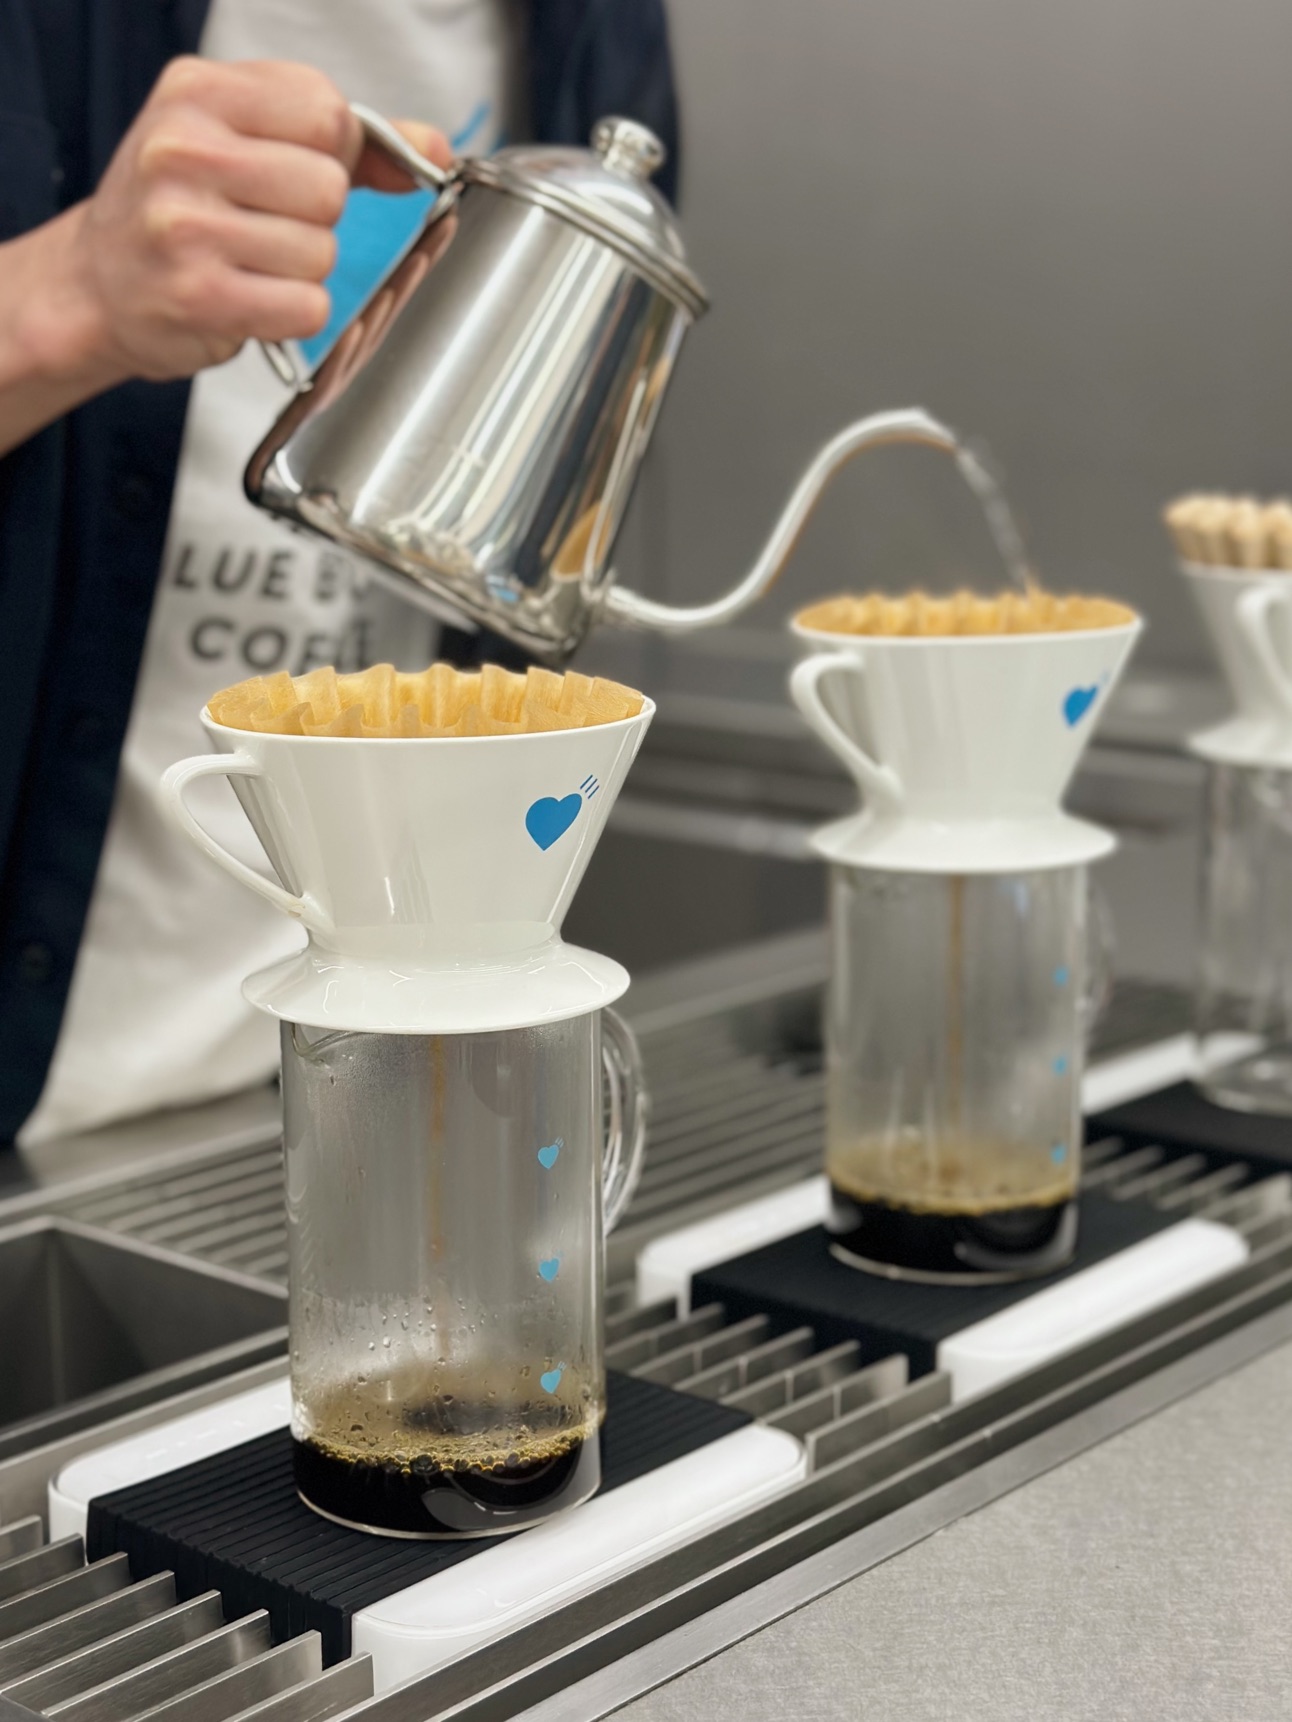 There's a slick new Blue Bottle Coffee in Human Made's Harajuku store